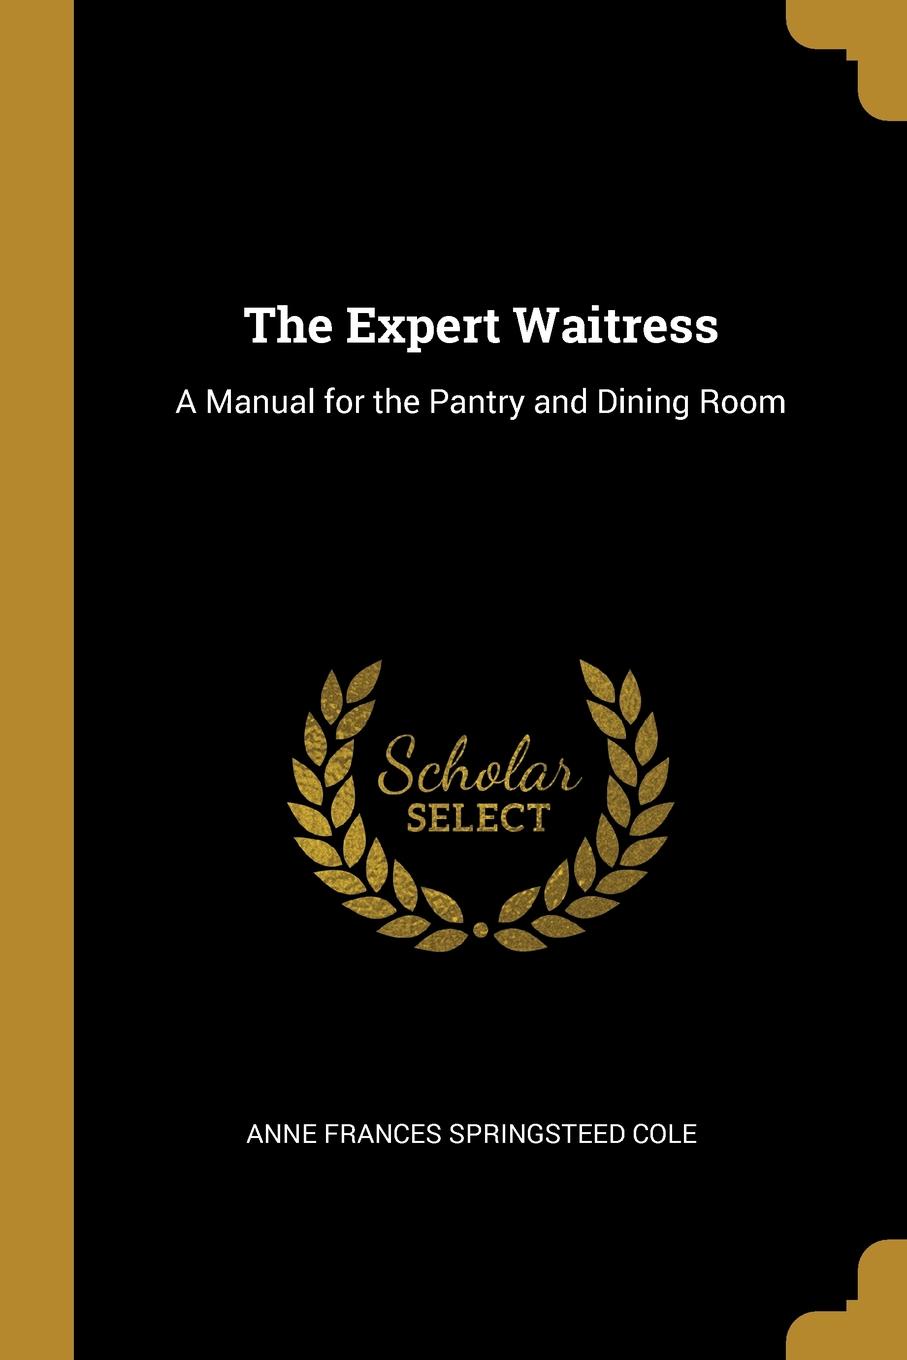 The Expert Waitress. A Manual for the Pantry and Dining Room